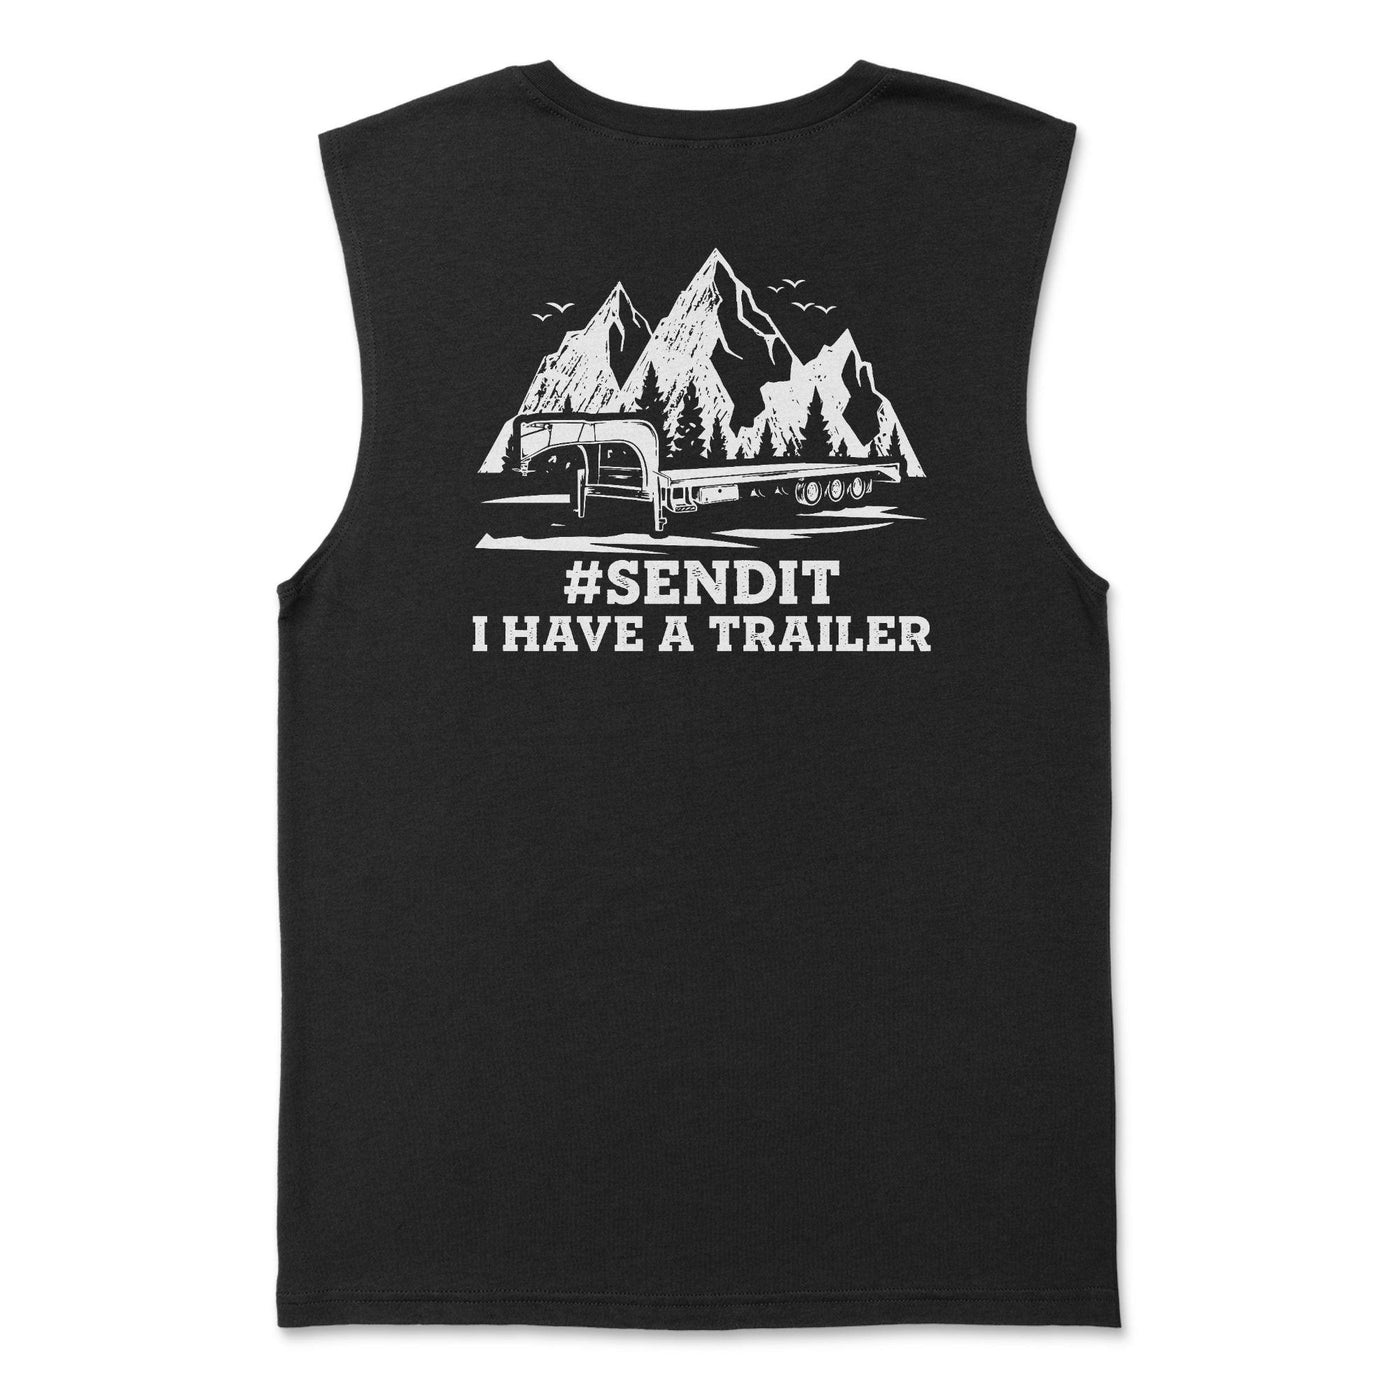 Men's Funny #SENDIT I Have A Trailer Muscle Tee - Goats Trail